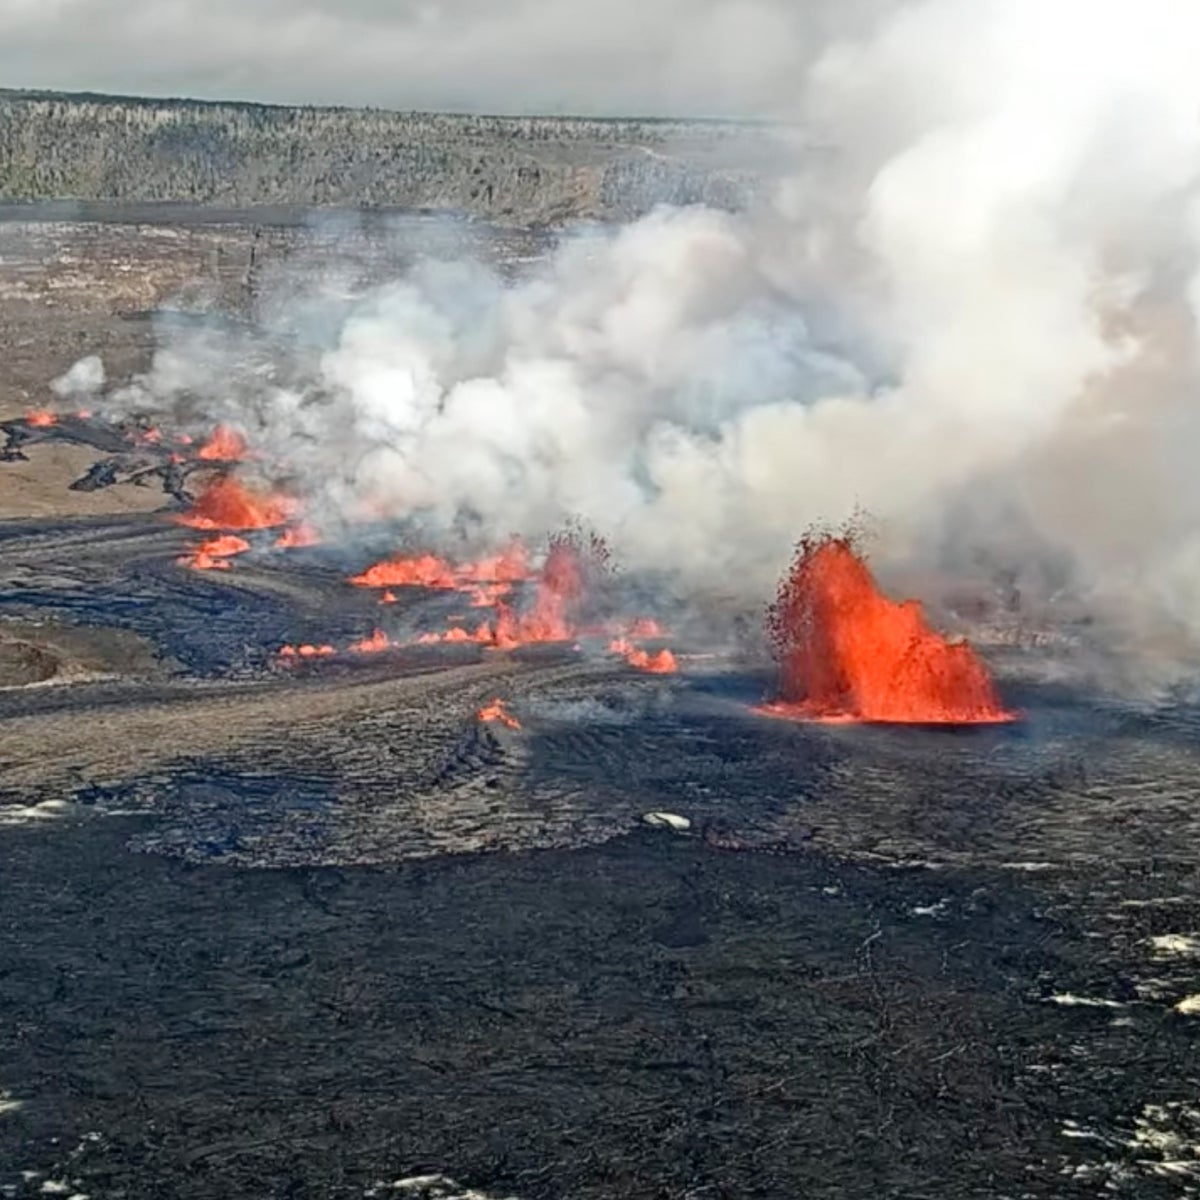 Hawaii’s Kilauea volcano erupts for third time this year as authorities issue ‘red’ warning (independent.co.uk)